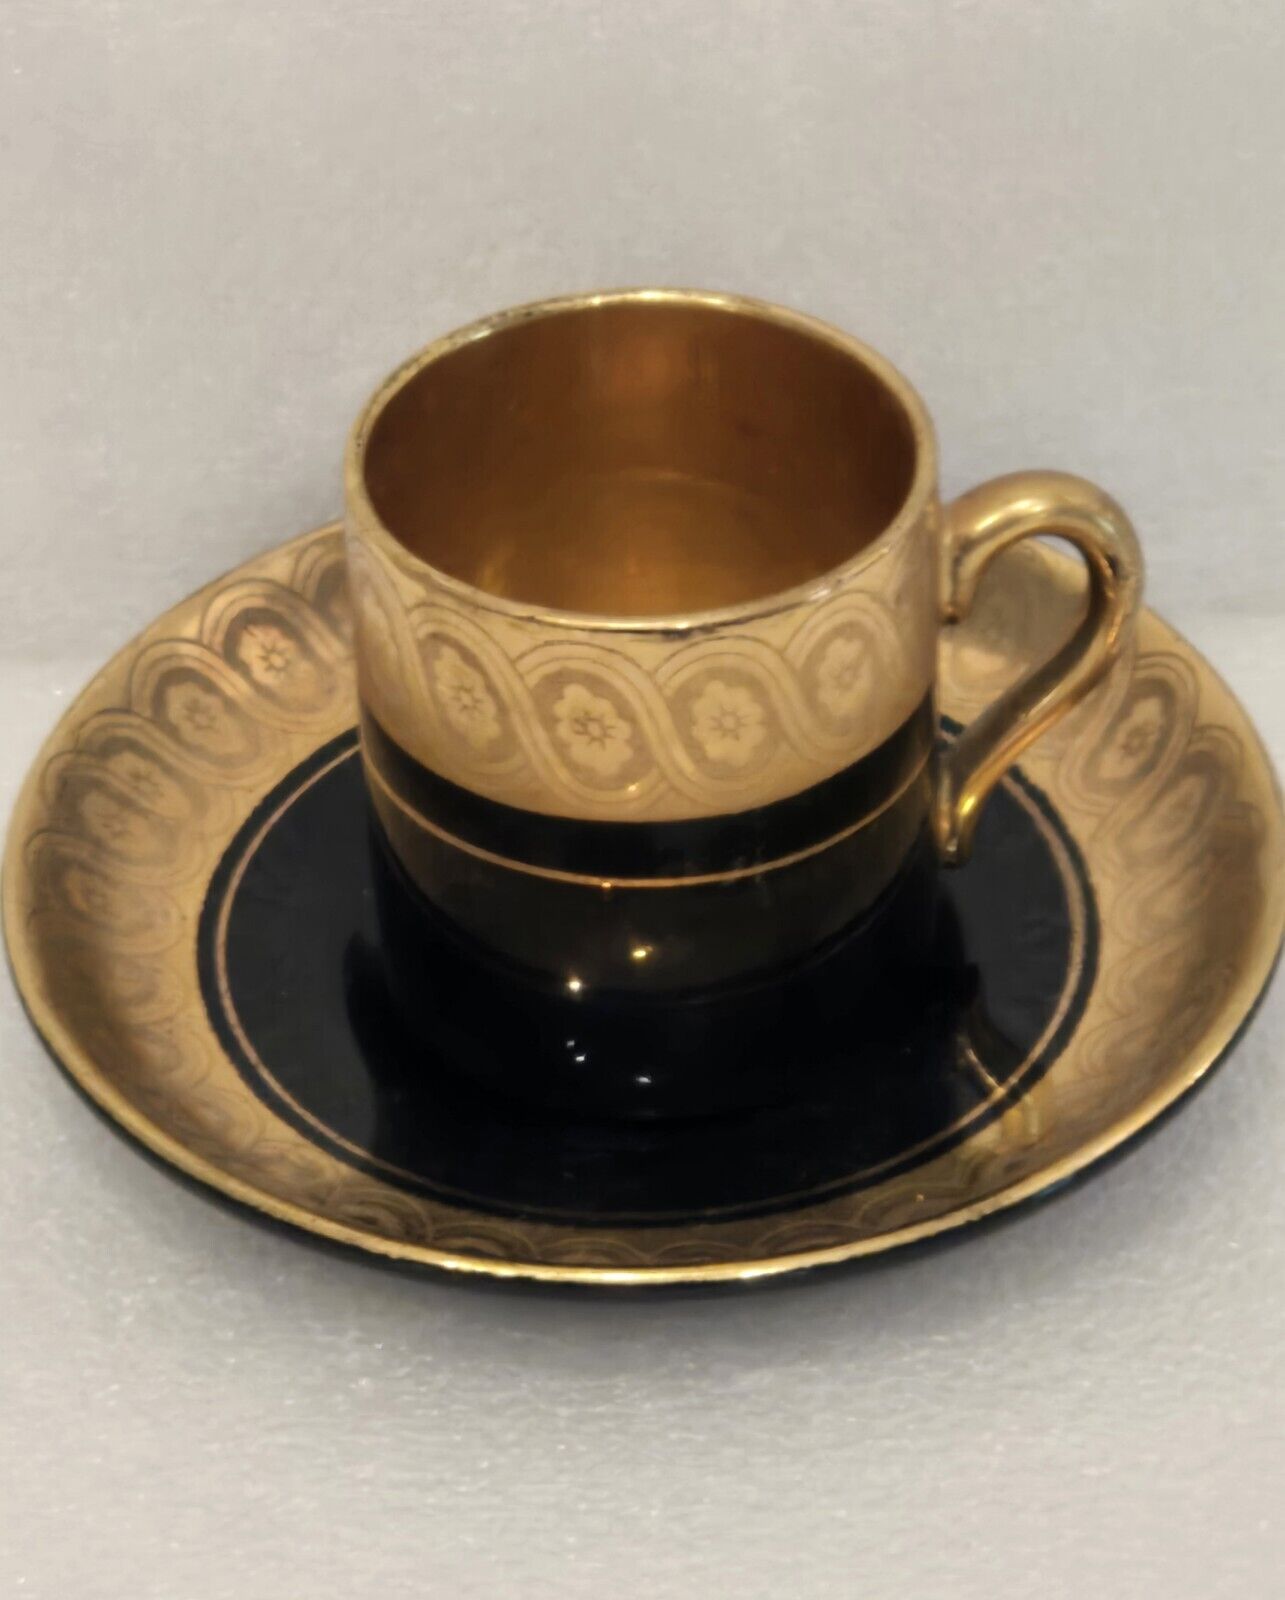 Stunning Gibson & Sons Late Sevres Davenport Demitasse Cup & Saucer Set Numbered